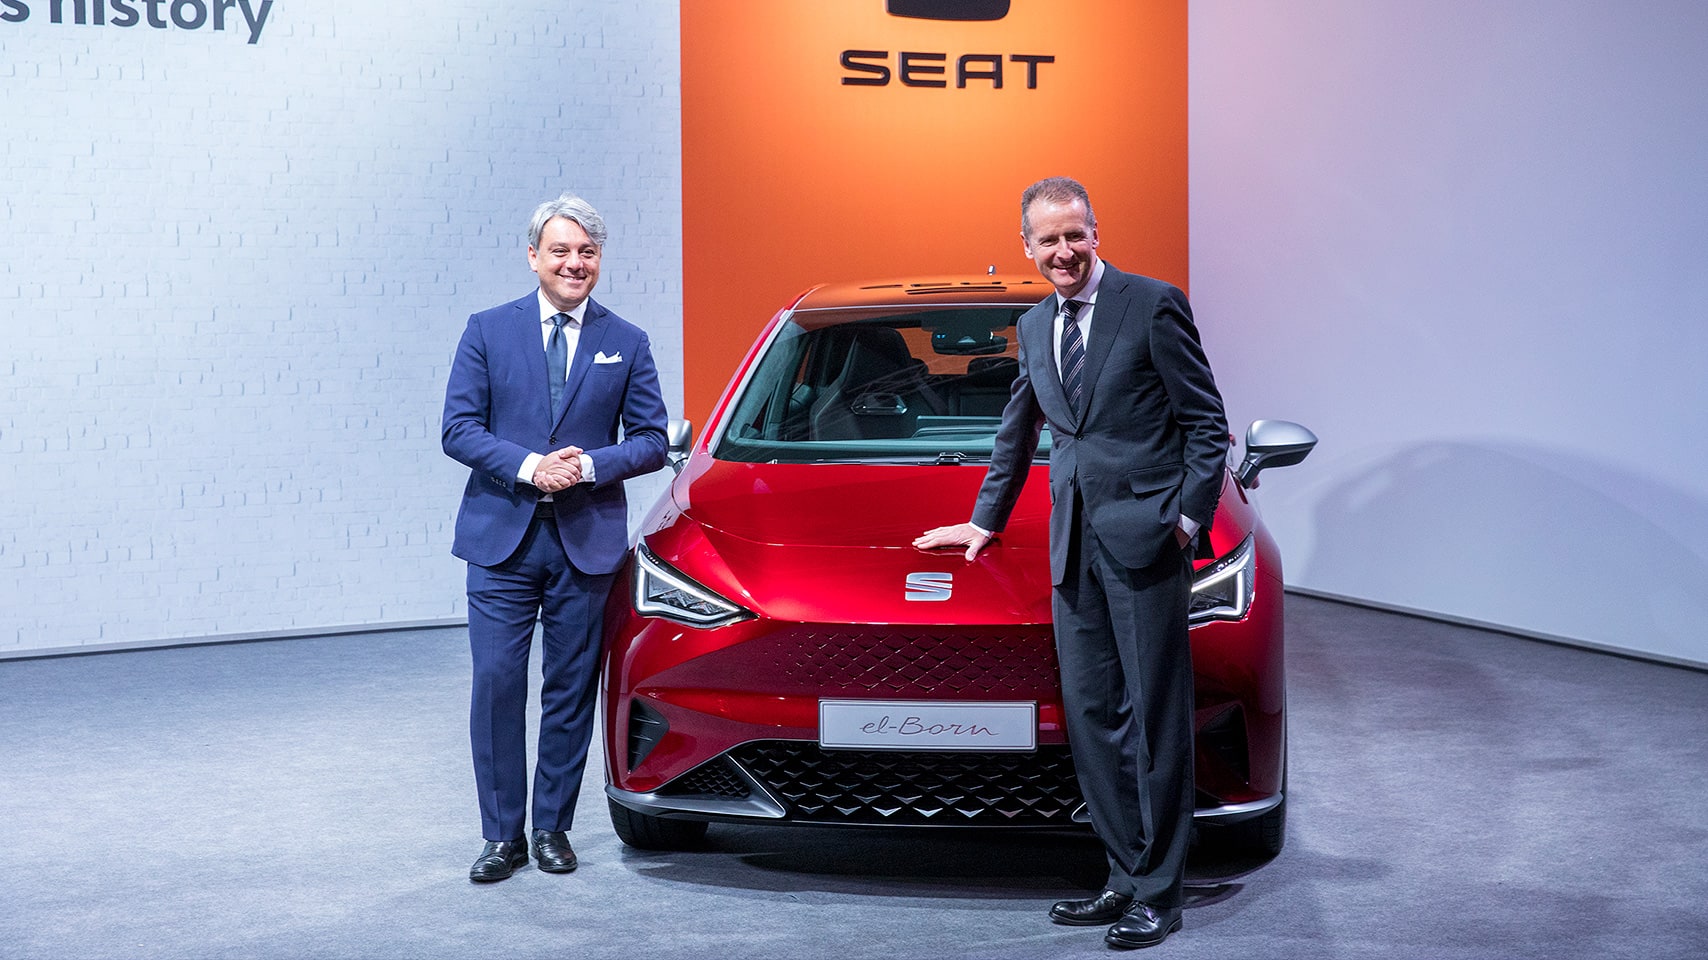 SEAT Committee Annual Media Conference with cars elBorn